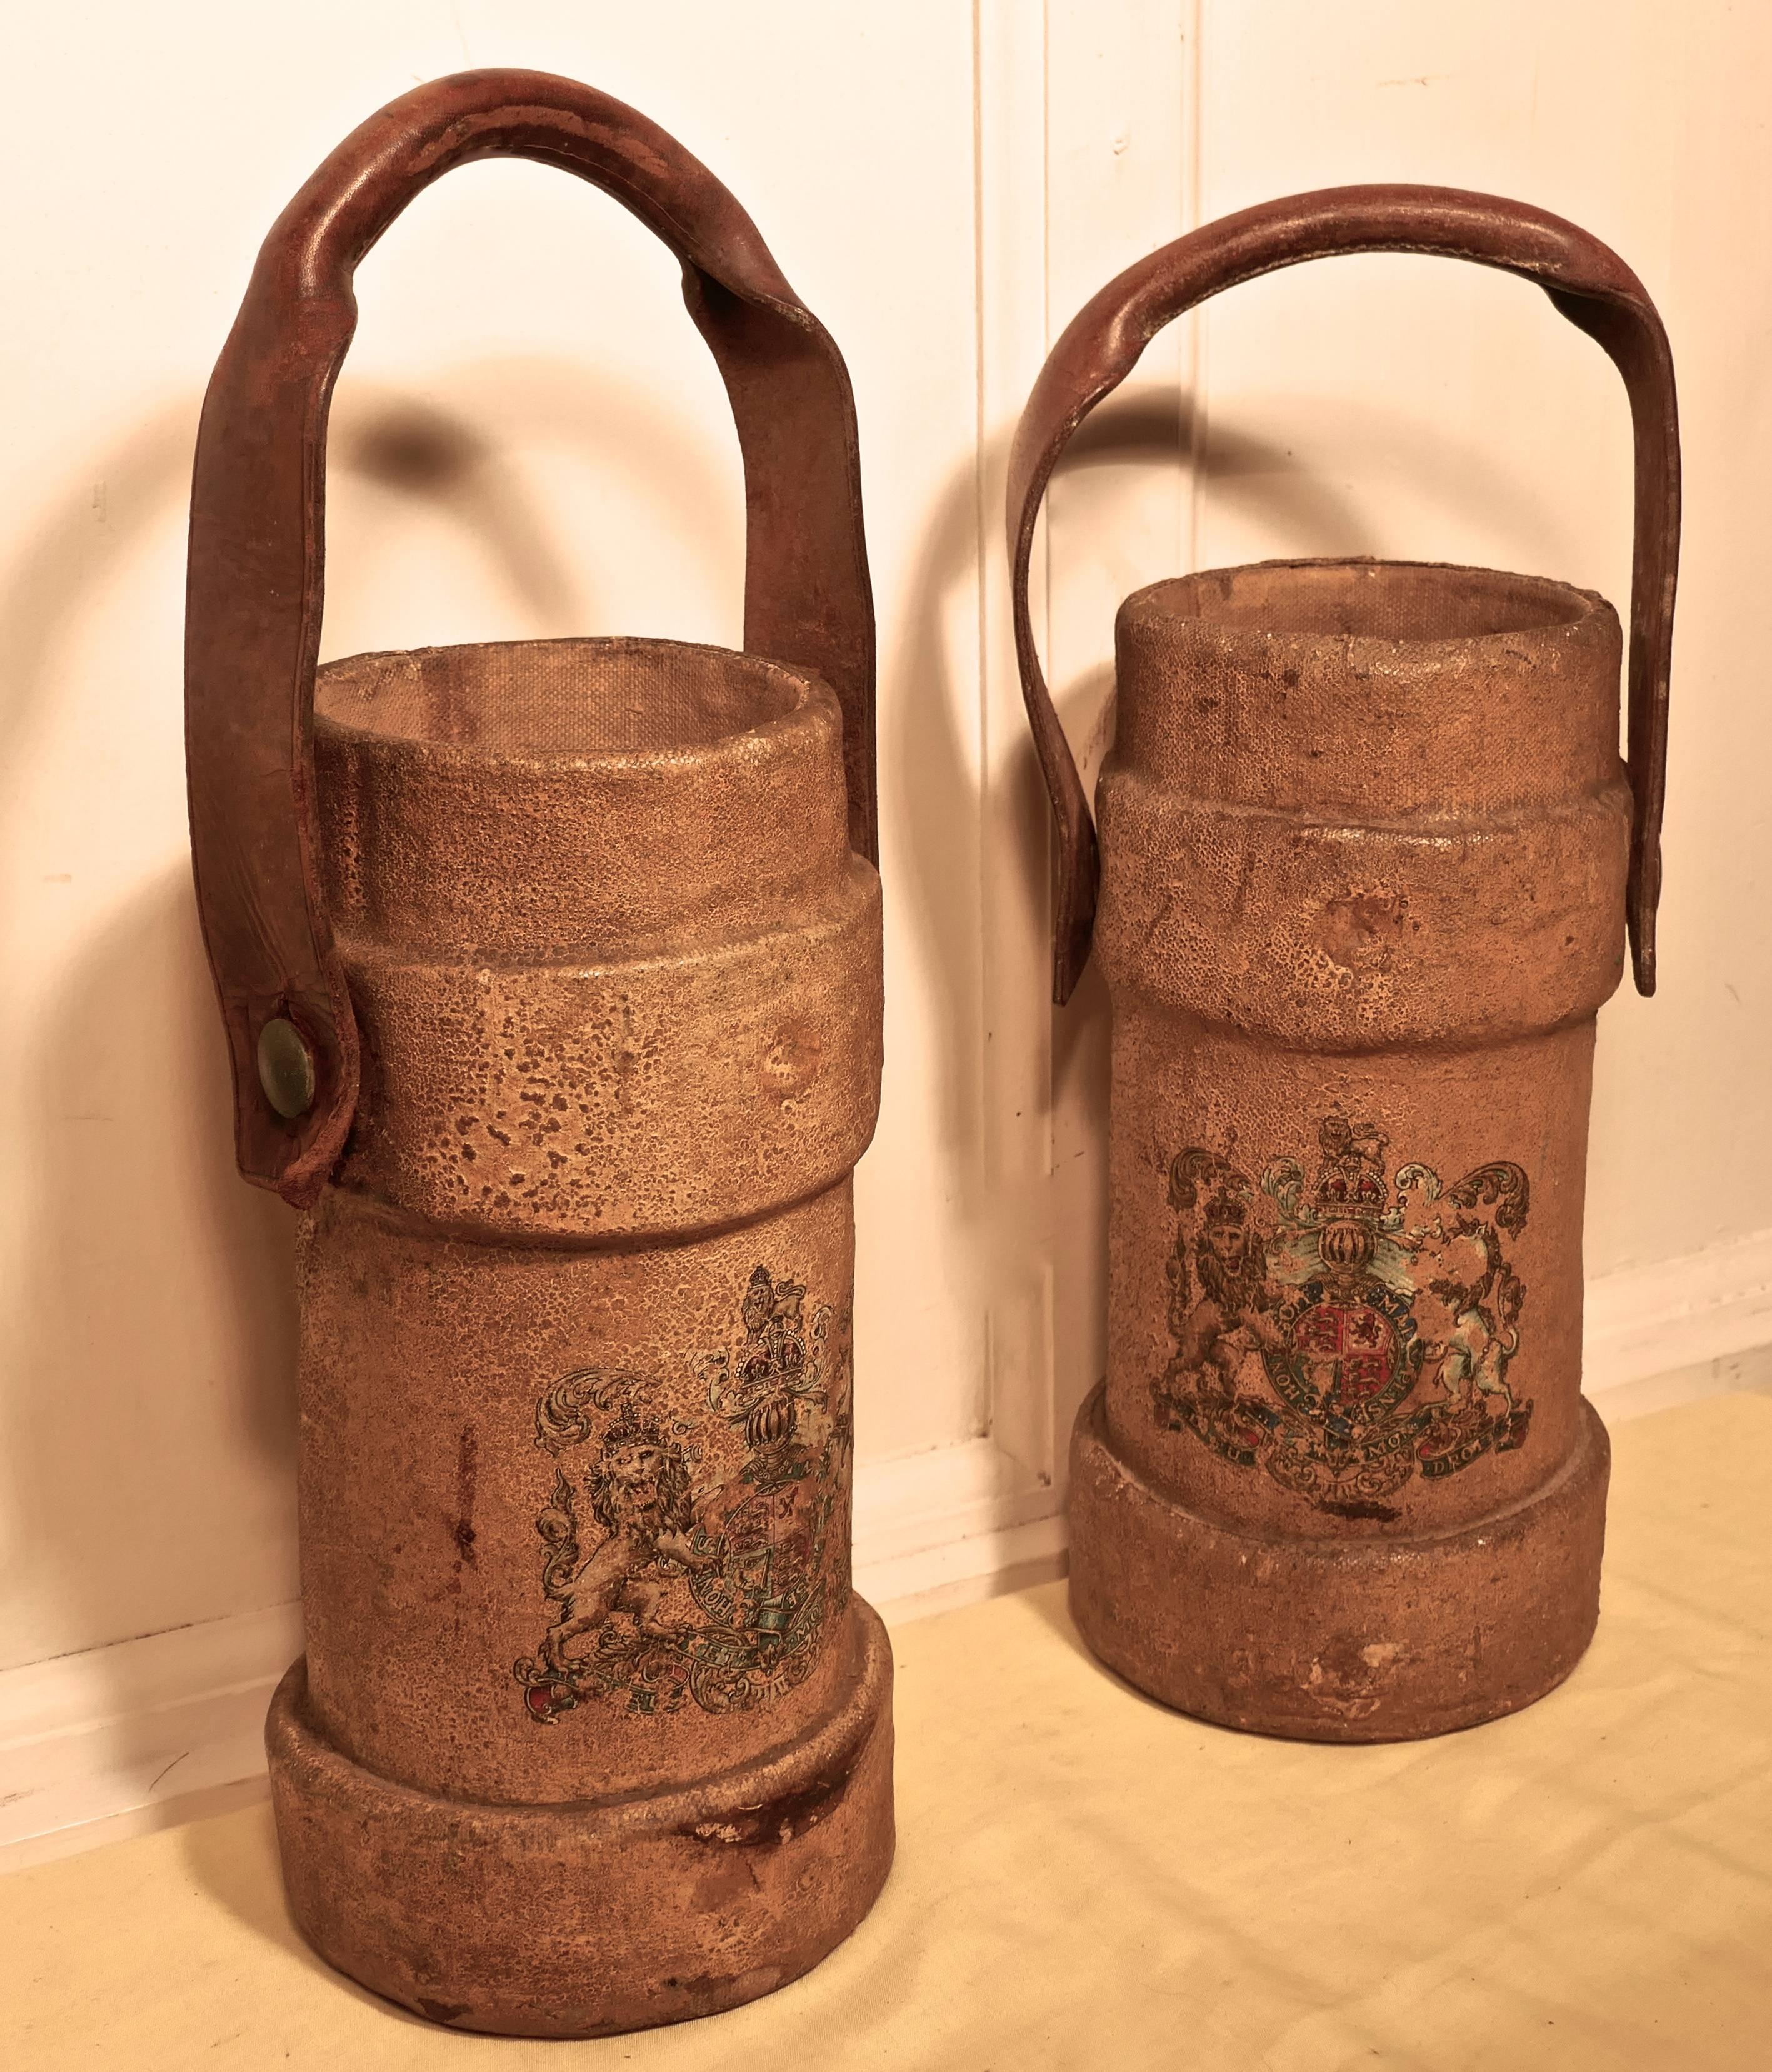 British army canvas artillery shell carriers, or quirky stick stands 

This is a pair of saddler made canvas artillery shell carriers they have two reinforced bands, leather handles and hand-painted gilt and polychrome Royal coat of arms

These